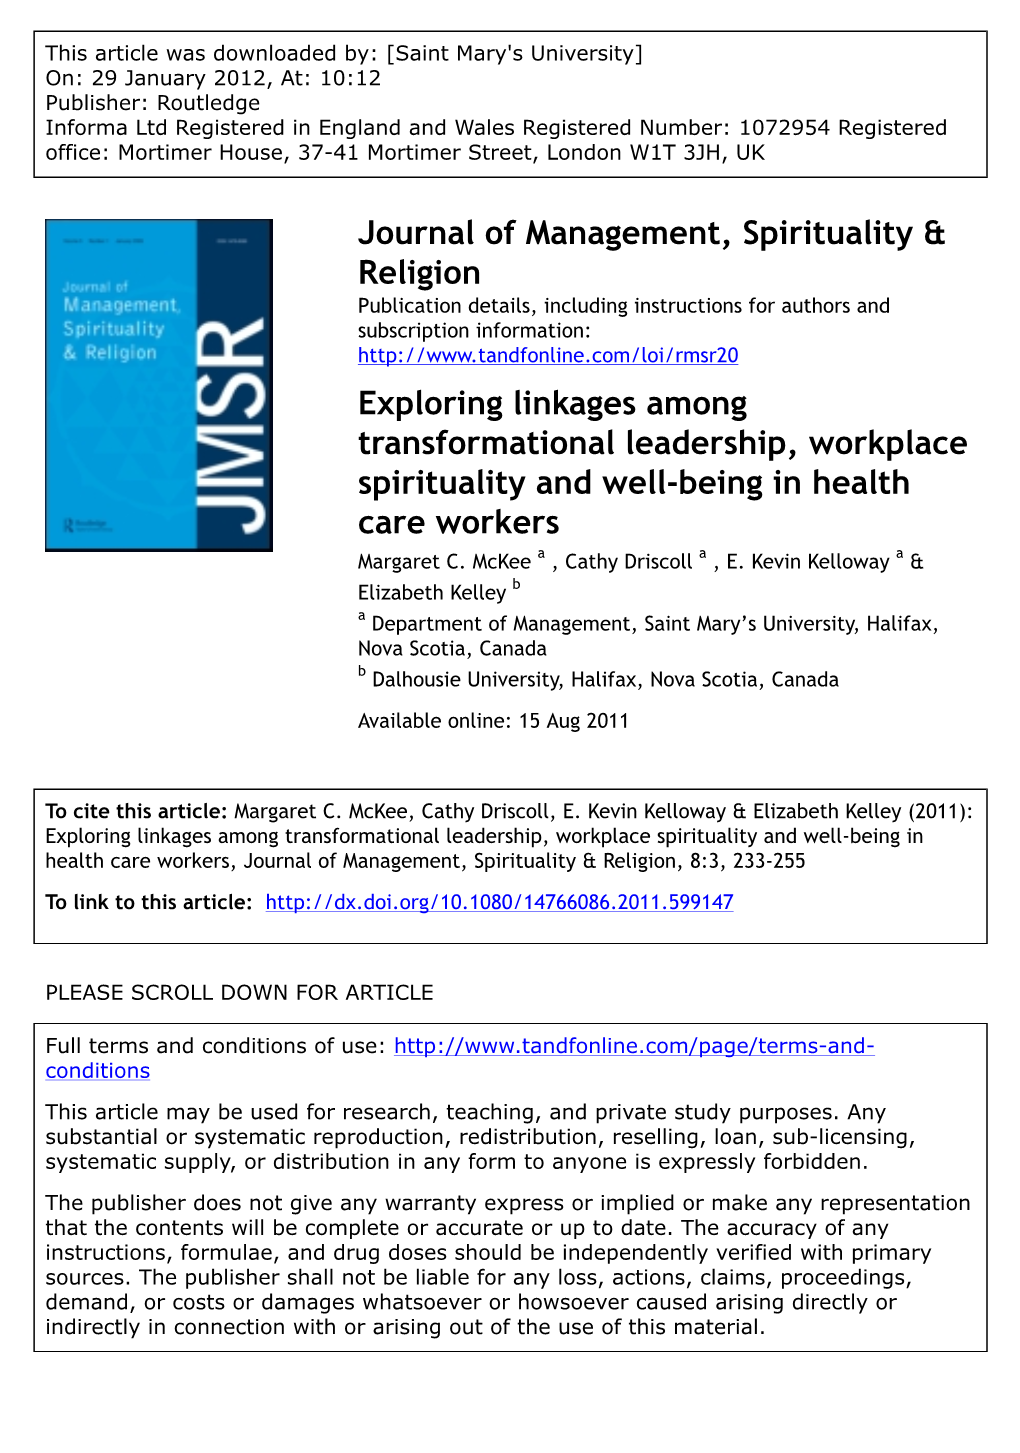 Exploring Linkages Among Transformational Leadership, Workplace Spirituality and Well-Being in Health Care Workers Margaret C